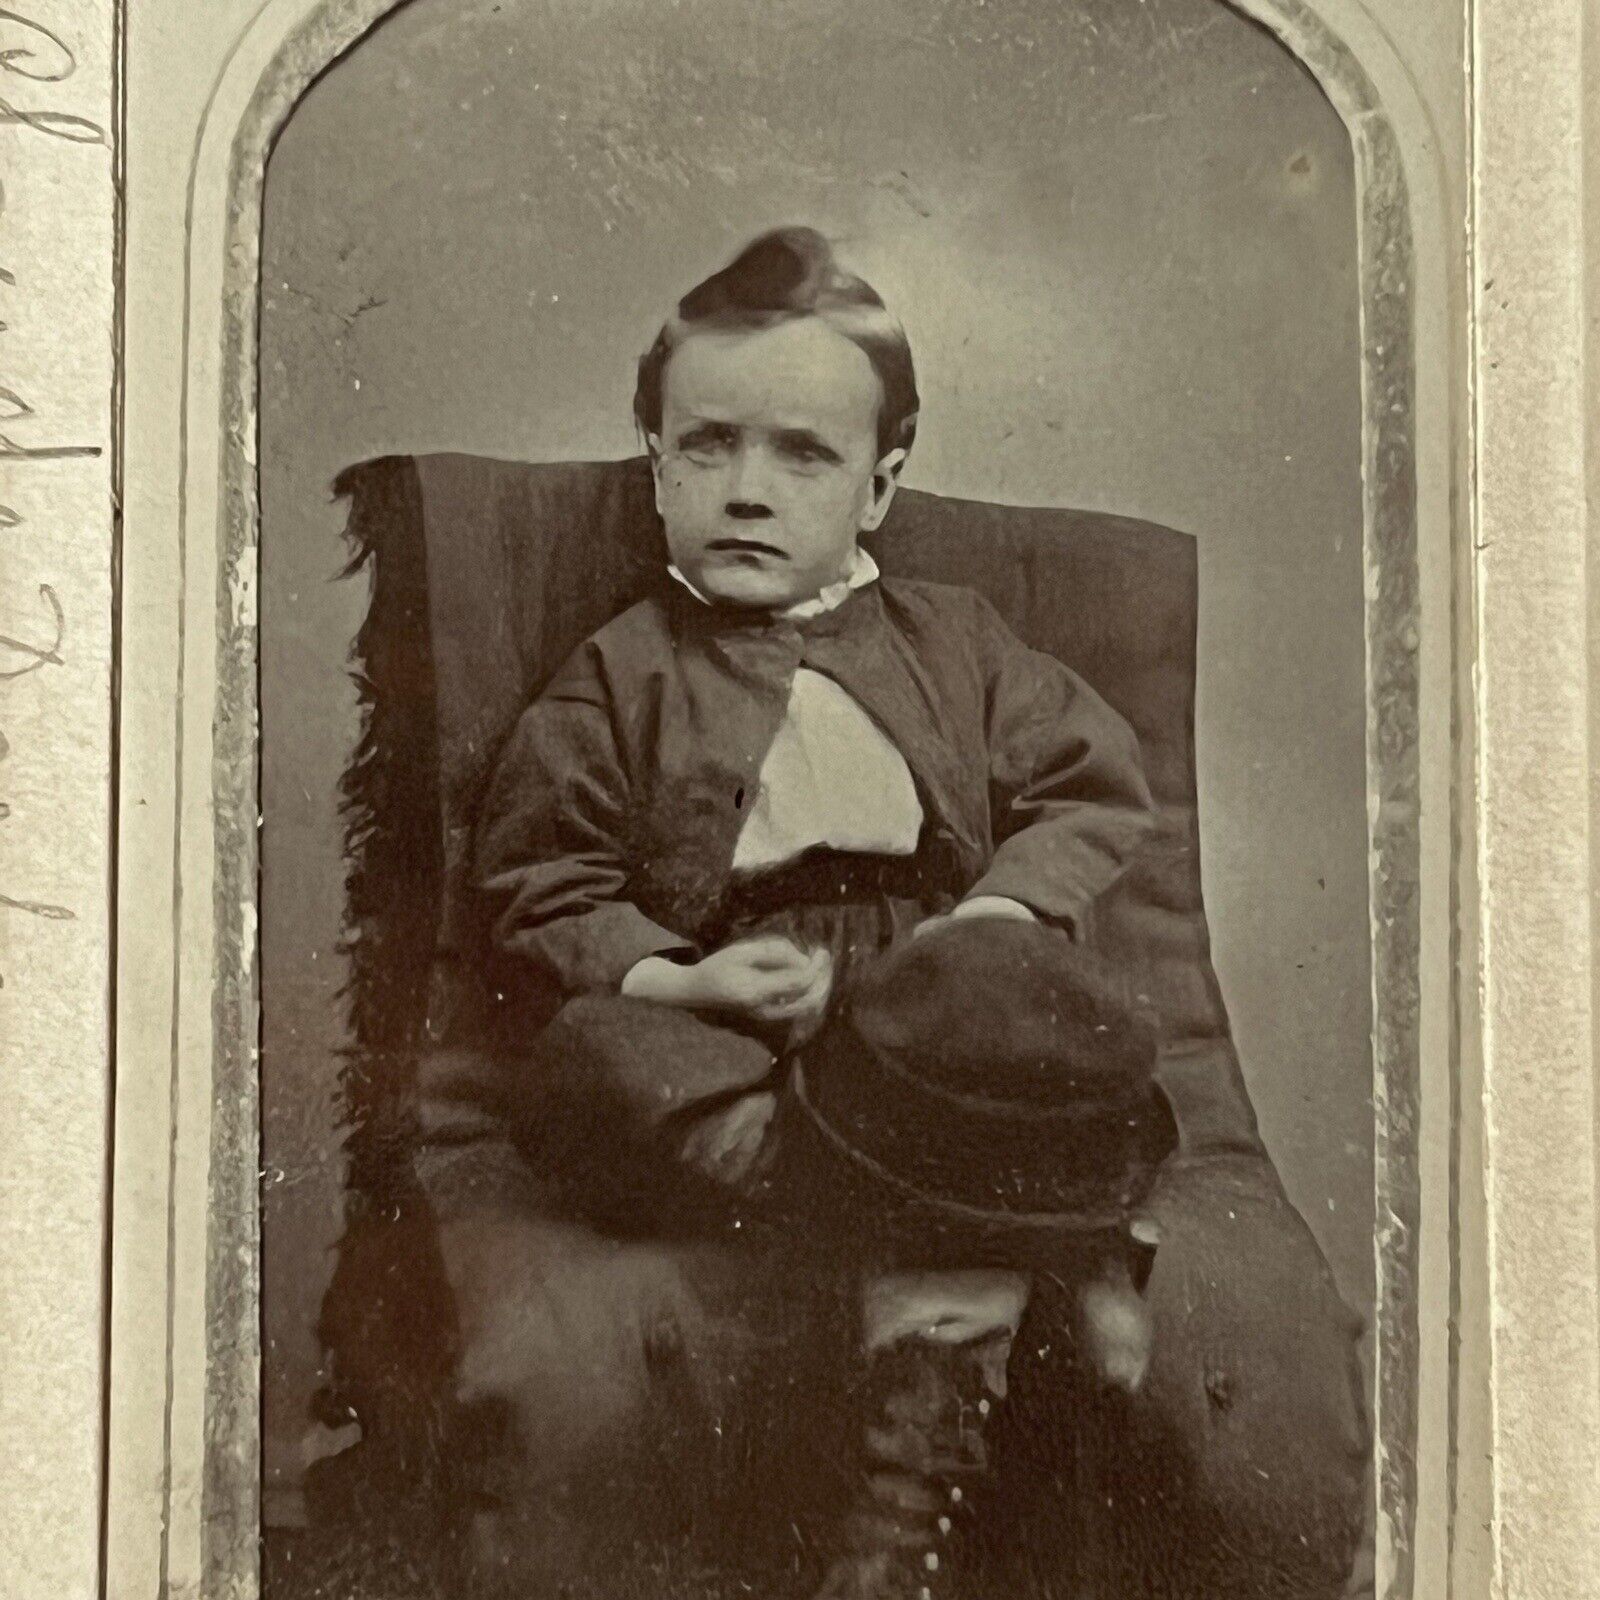 Antique CDV Cabinet Card Photograph Adorable Boy ID Clark Darby Stayton OR